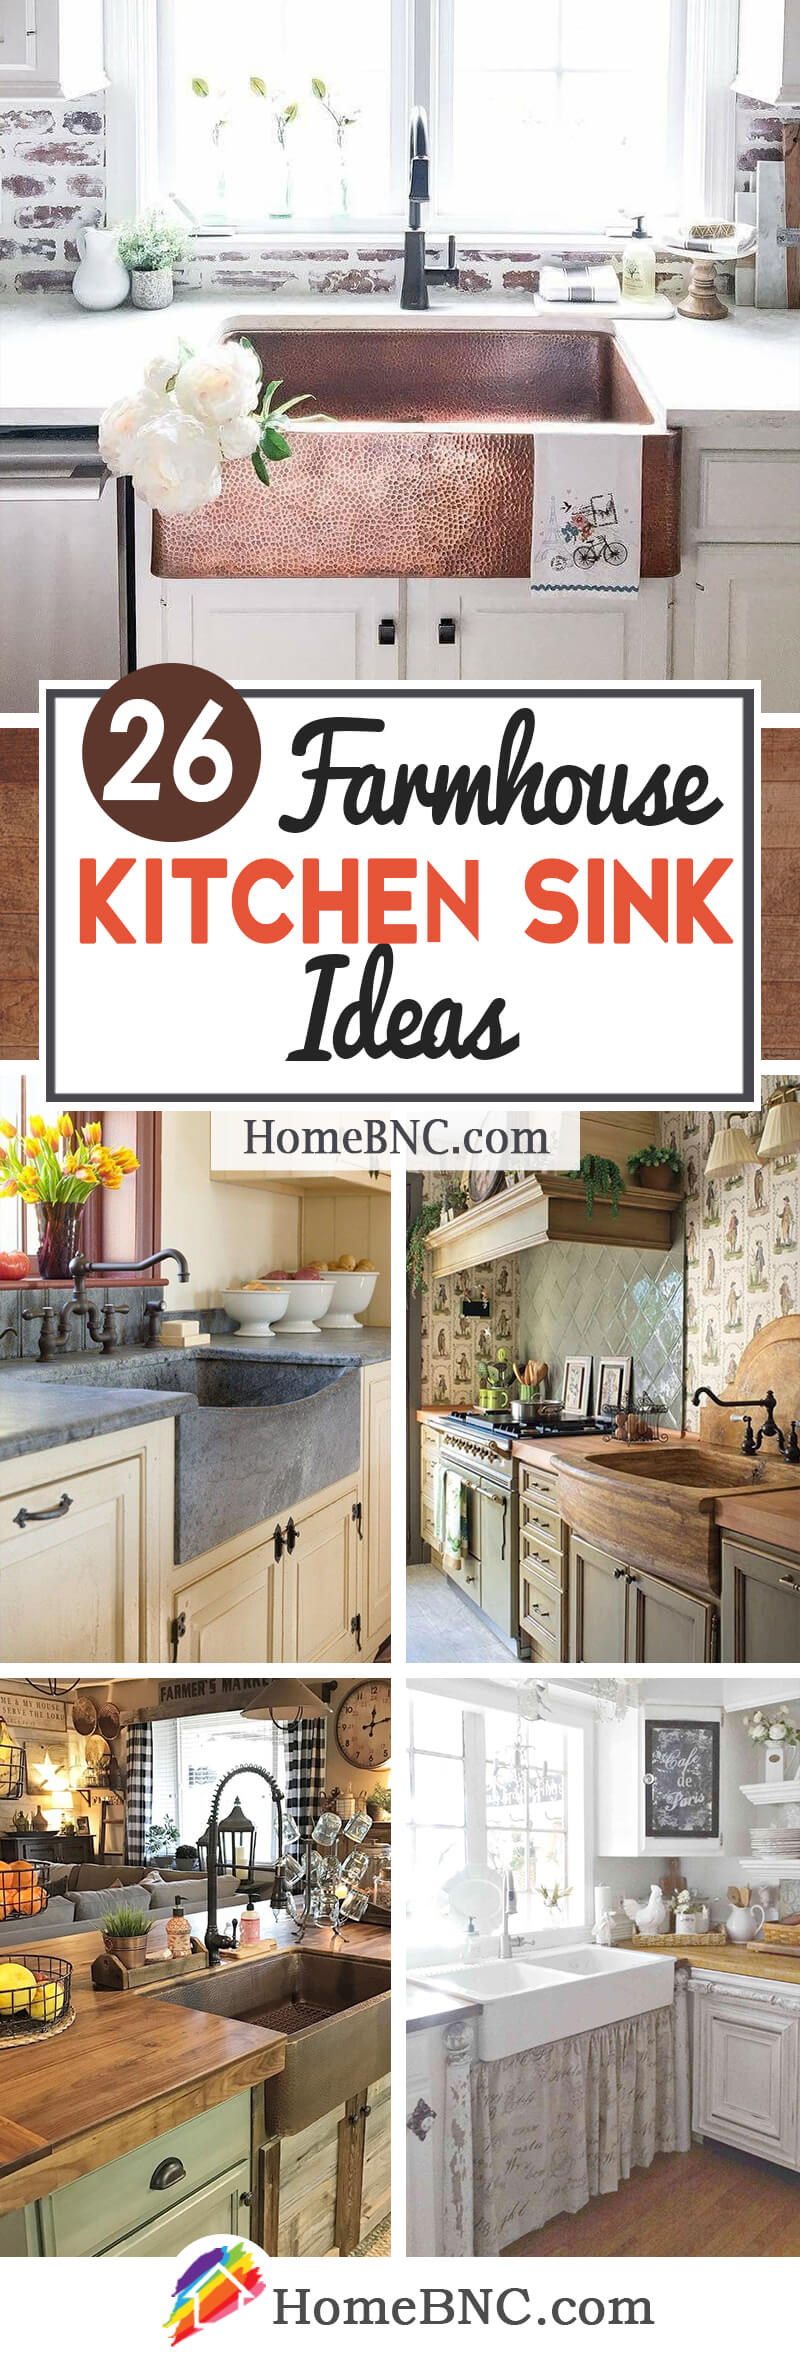 20 Farmhouse Kitchen Sink Ideas and Designs for 20